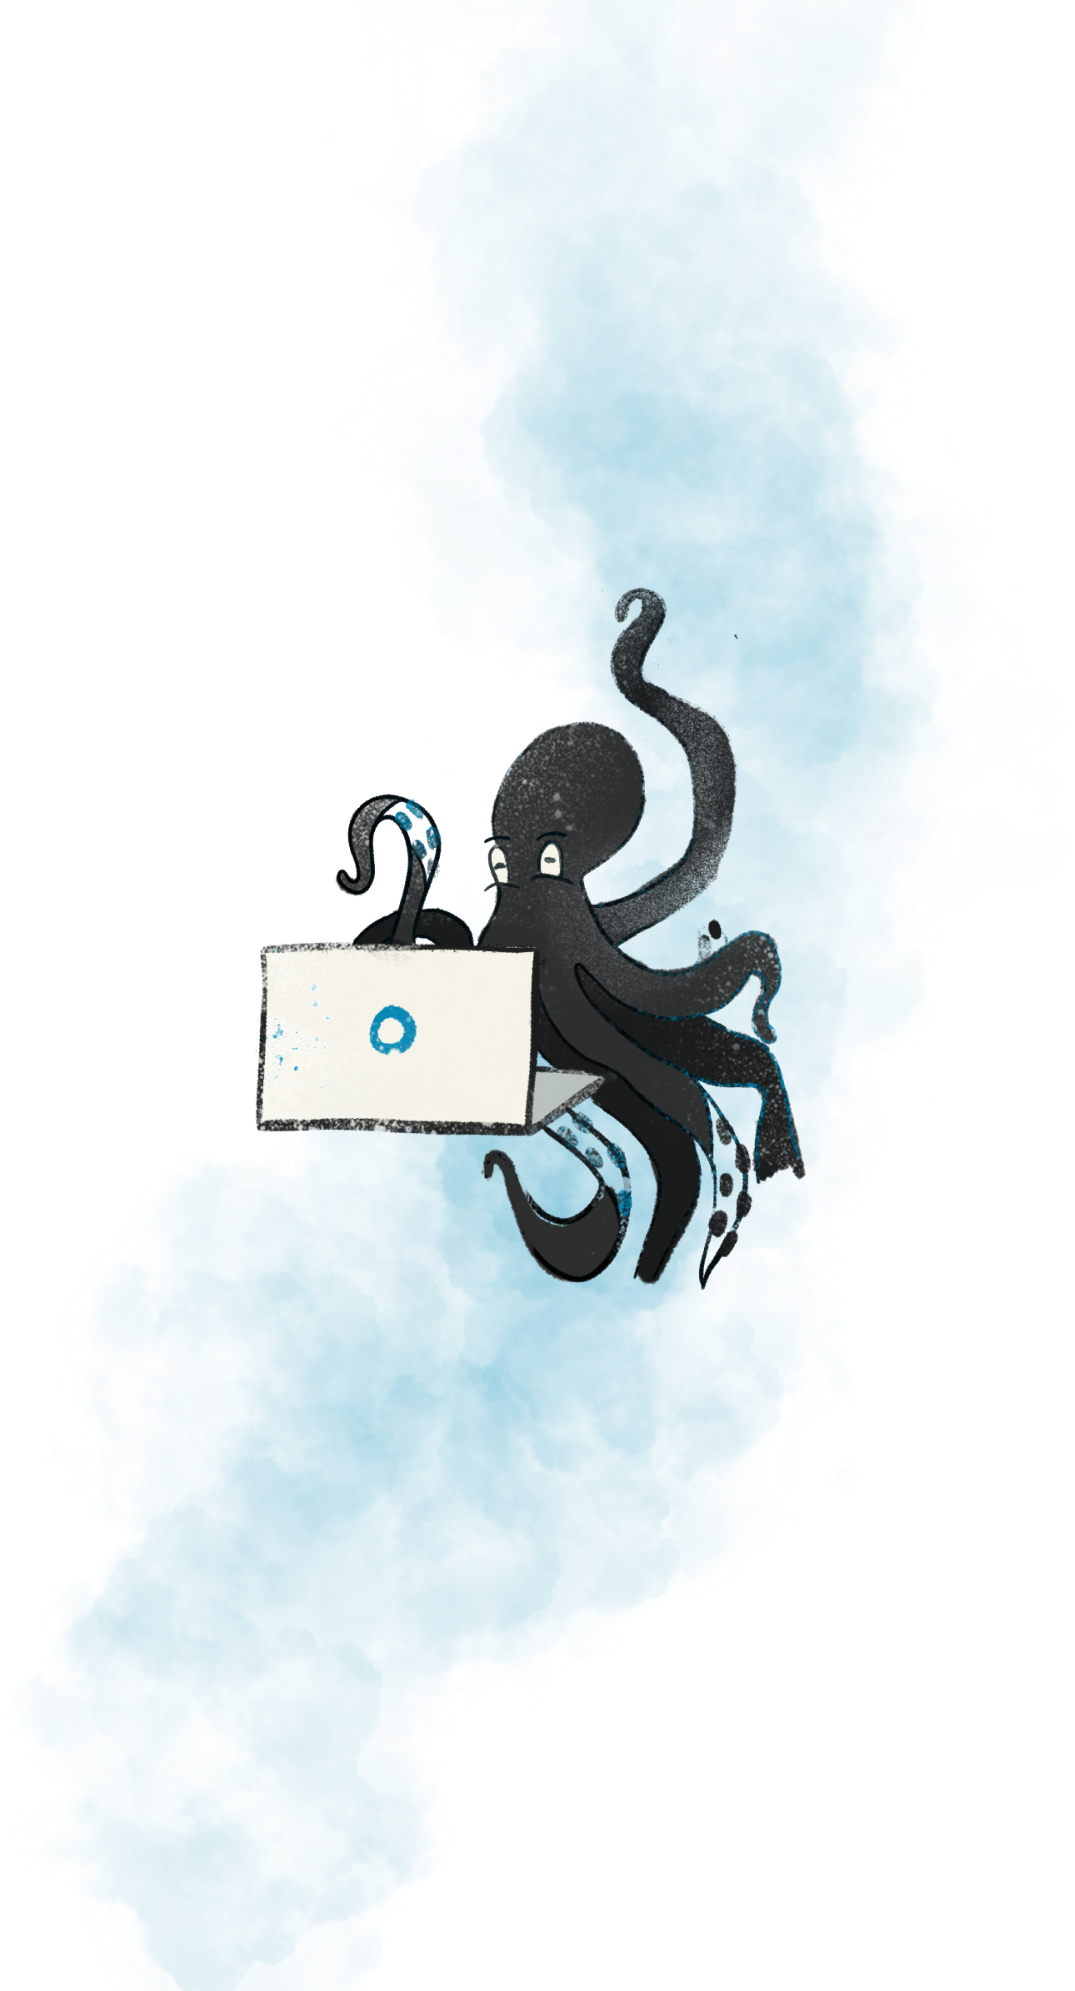 Monadical's octopus mascot typing in a laptop.